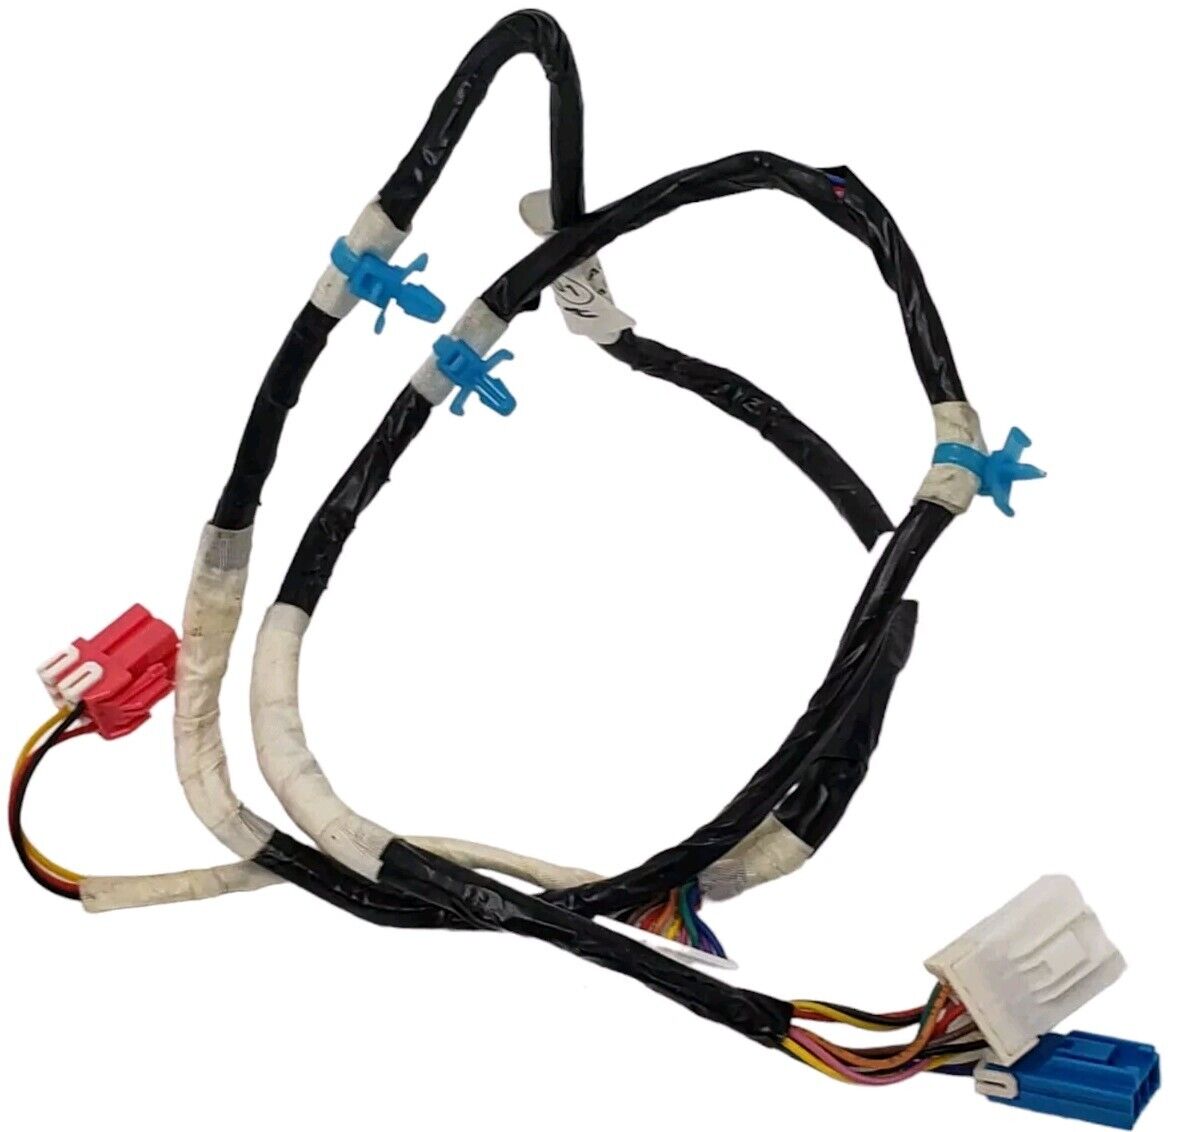 OEM Replacement for LG Washer Multi Harness EAD64205801